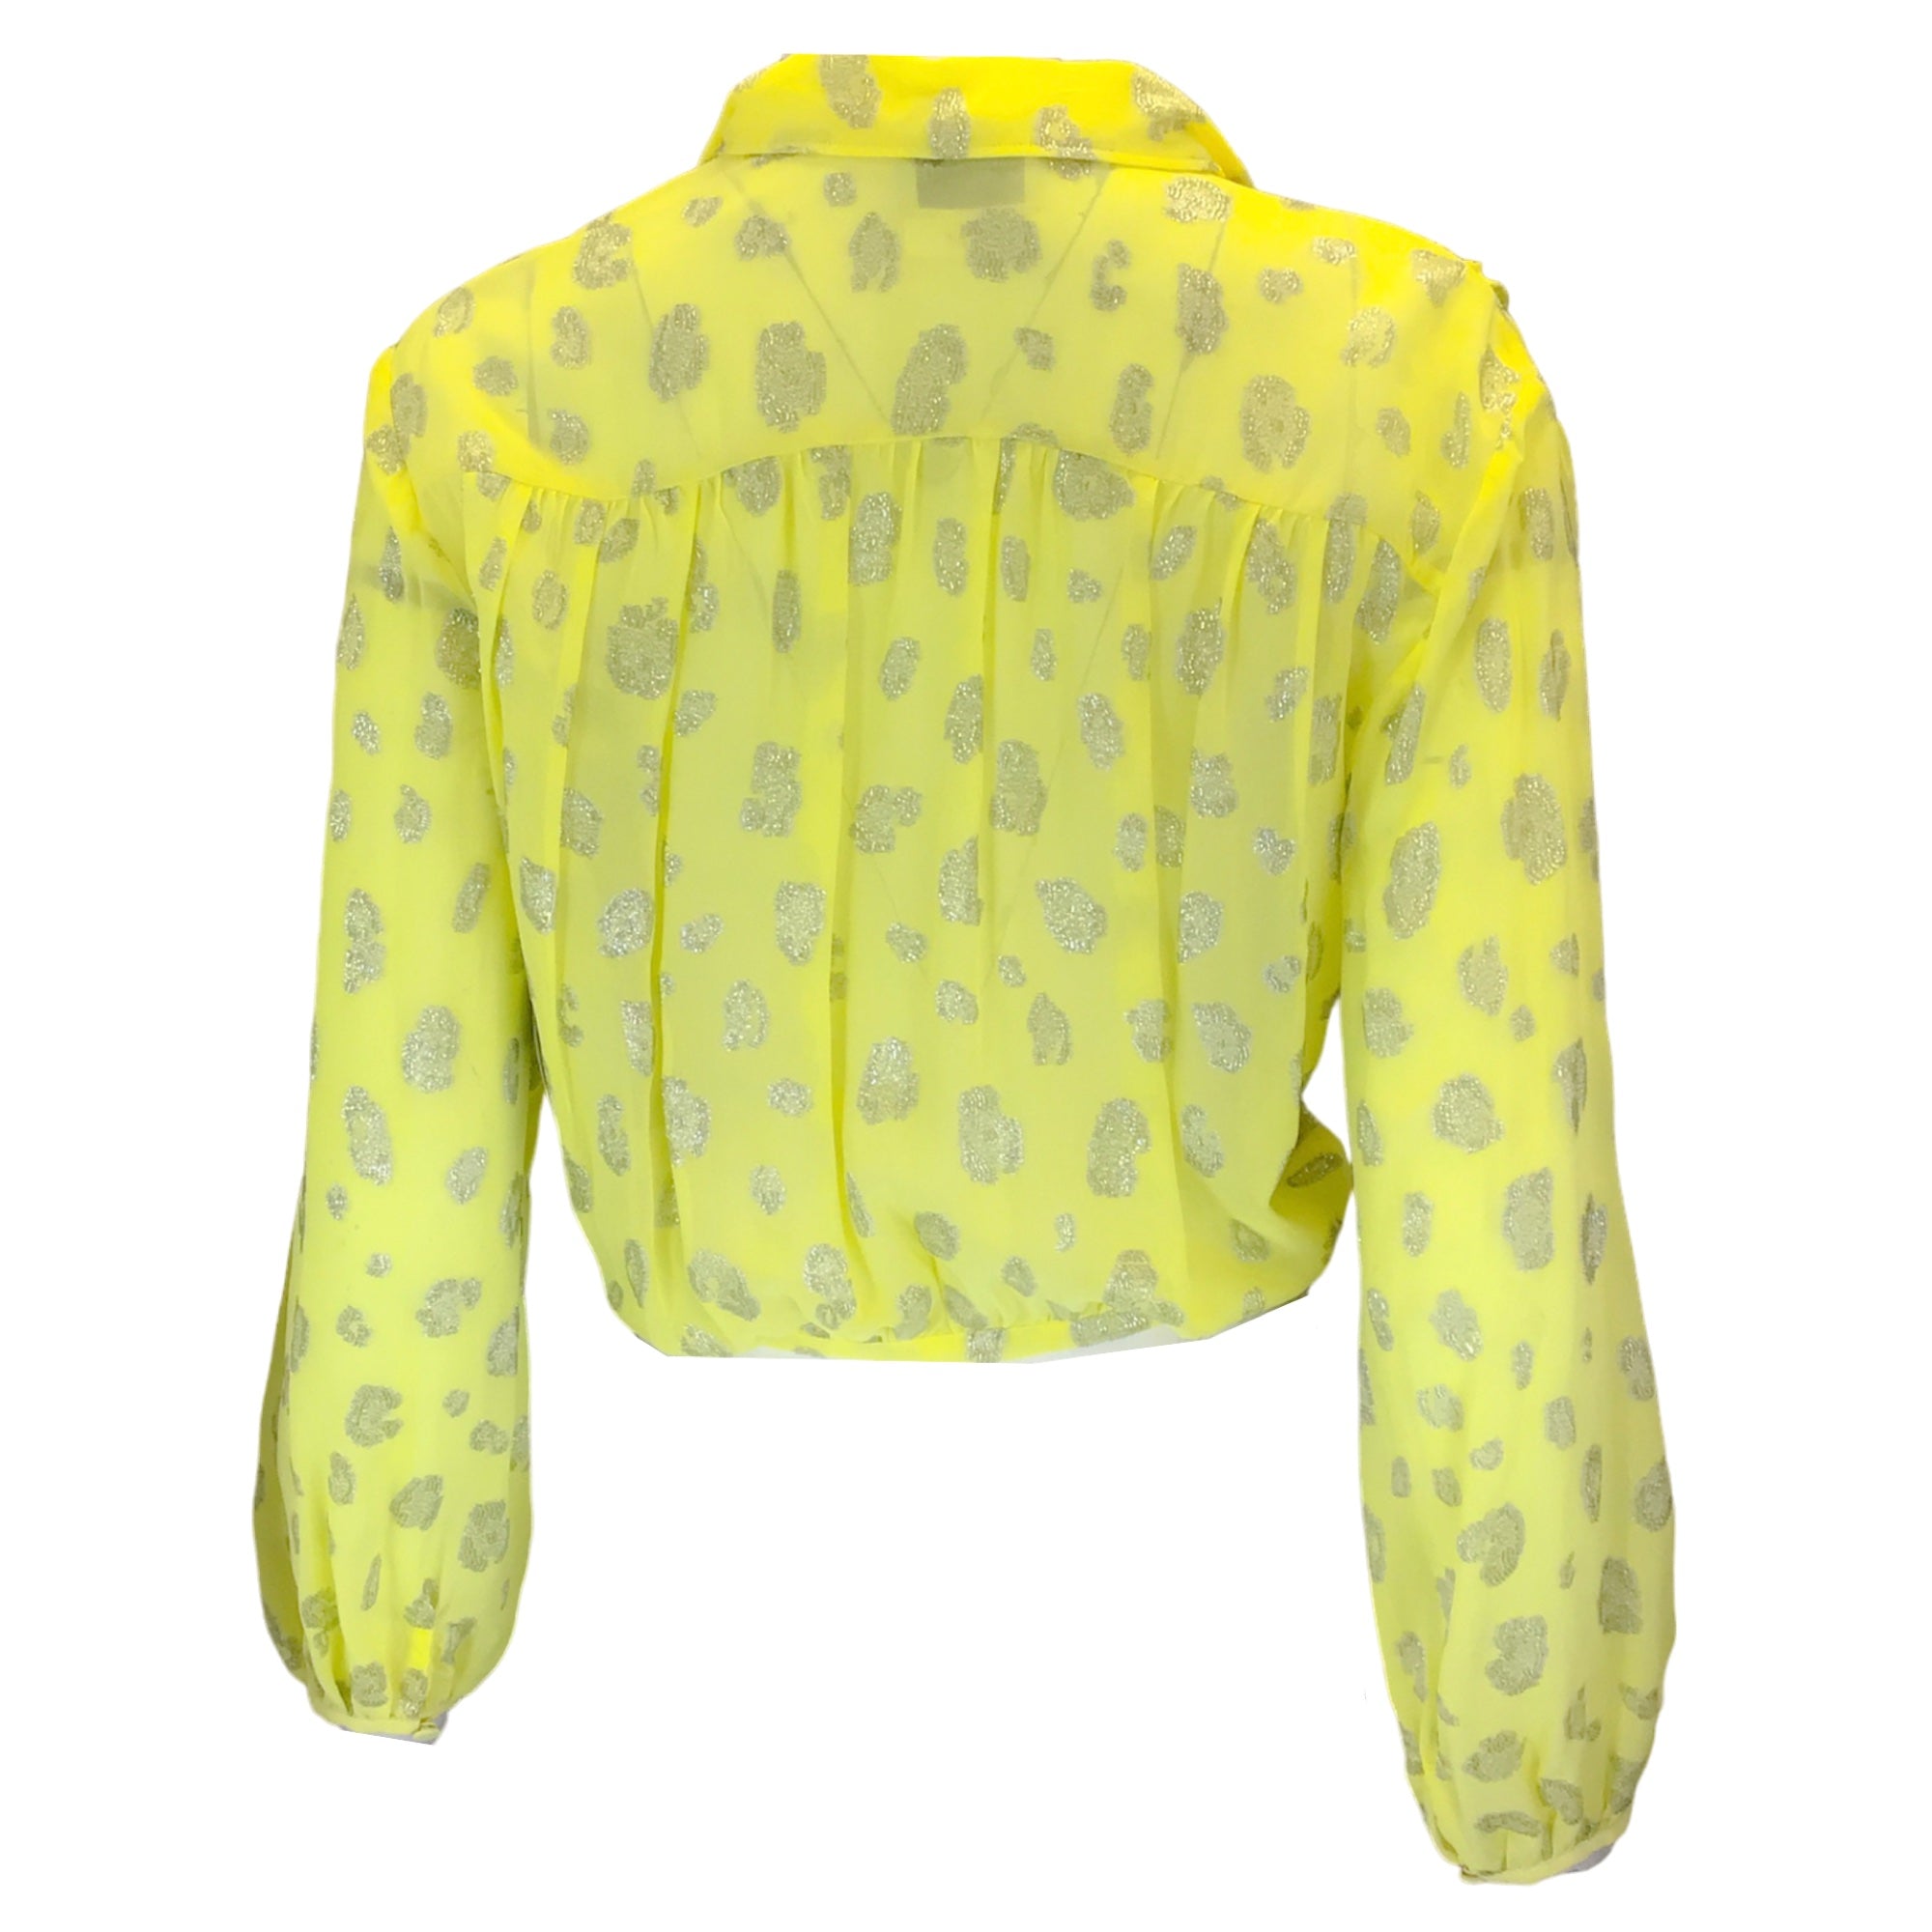 Forte Forte Yellow / Silver Metallic Sky of Stars Knotted Top